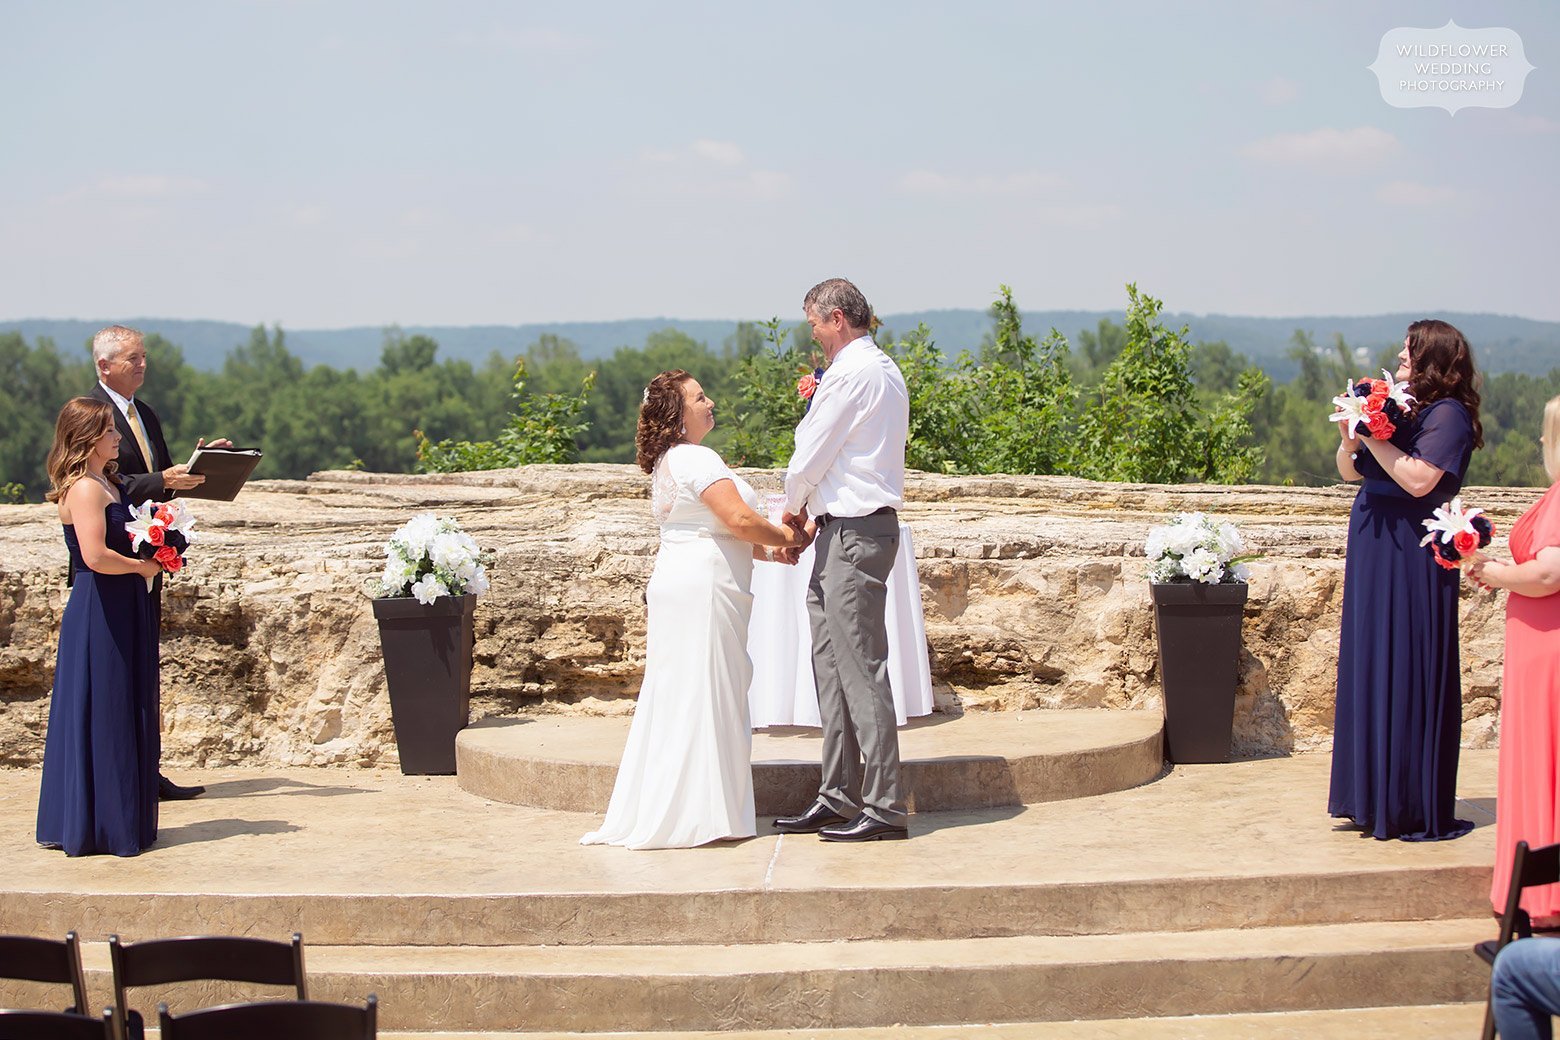 Outdoor ceremony in Hermann, MO with river behind.